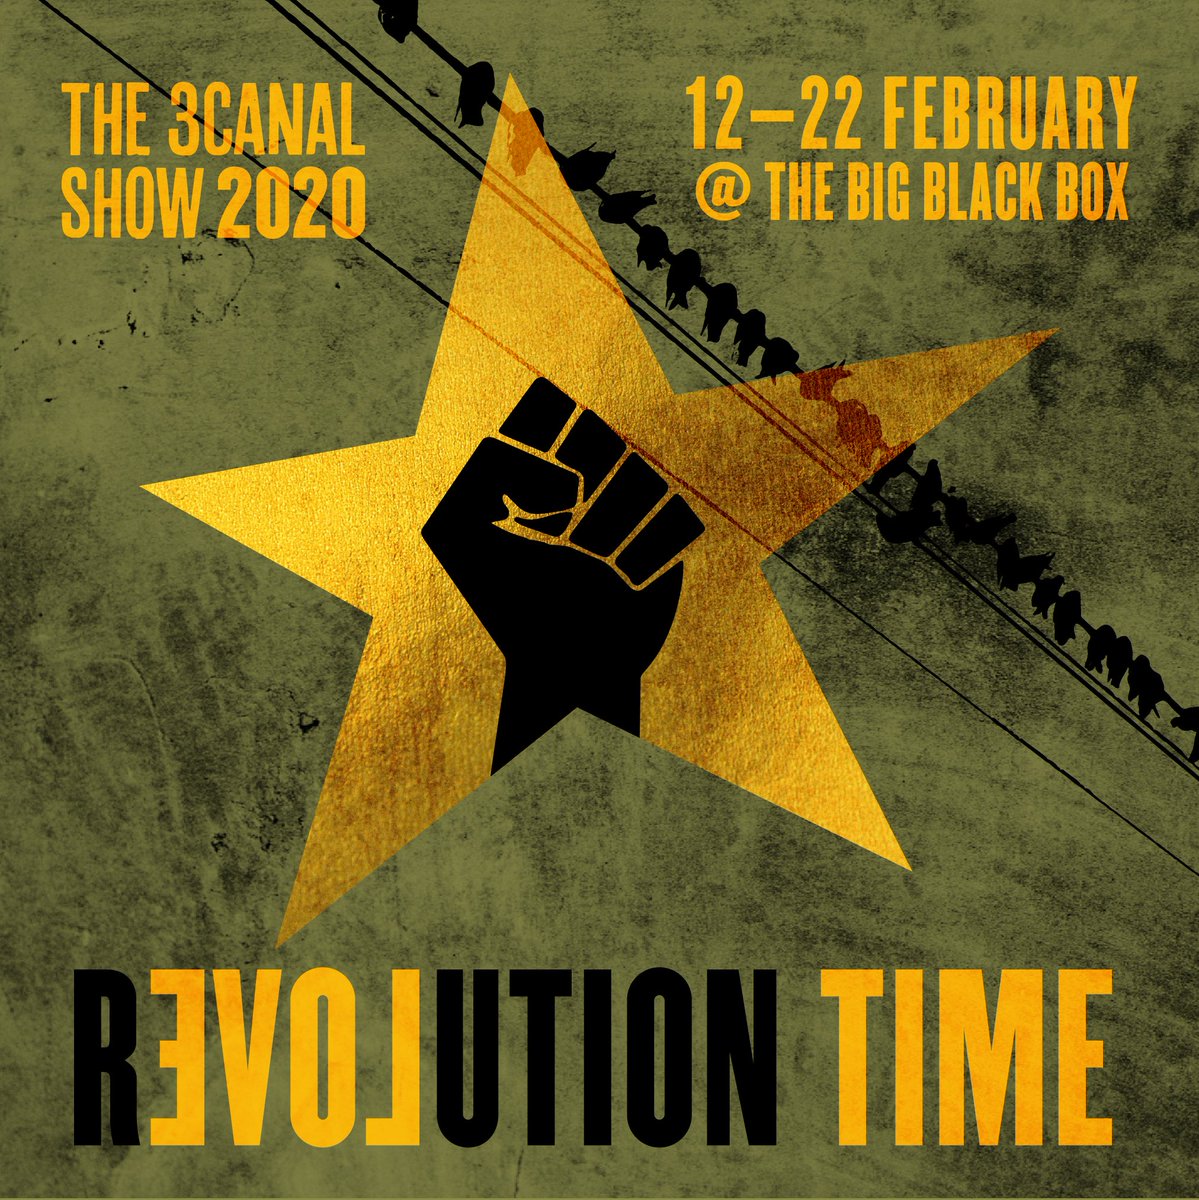 Time to claim a space and make a STATEMENT... The Battalion is ready! Are you? Only 4 more days until #3canalShow2020: REVOLUTION TIME!⁣ Get tickets: bit.ly/3cnlshow2020tx or come dong. $250 Dancefloor | $300 Seated⁣ Photo by: Jason C Audain #3canalshow2020 #carnival2020